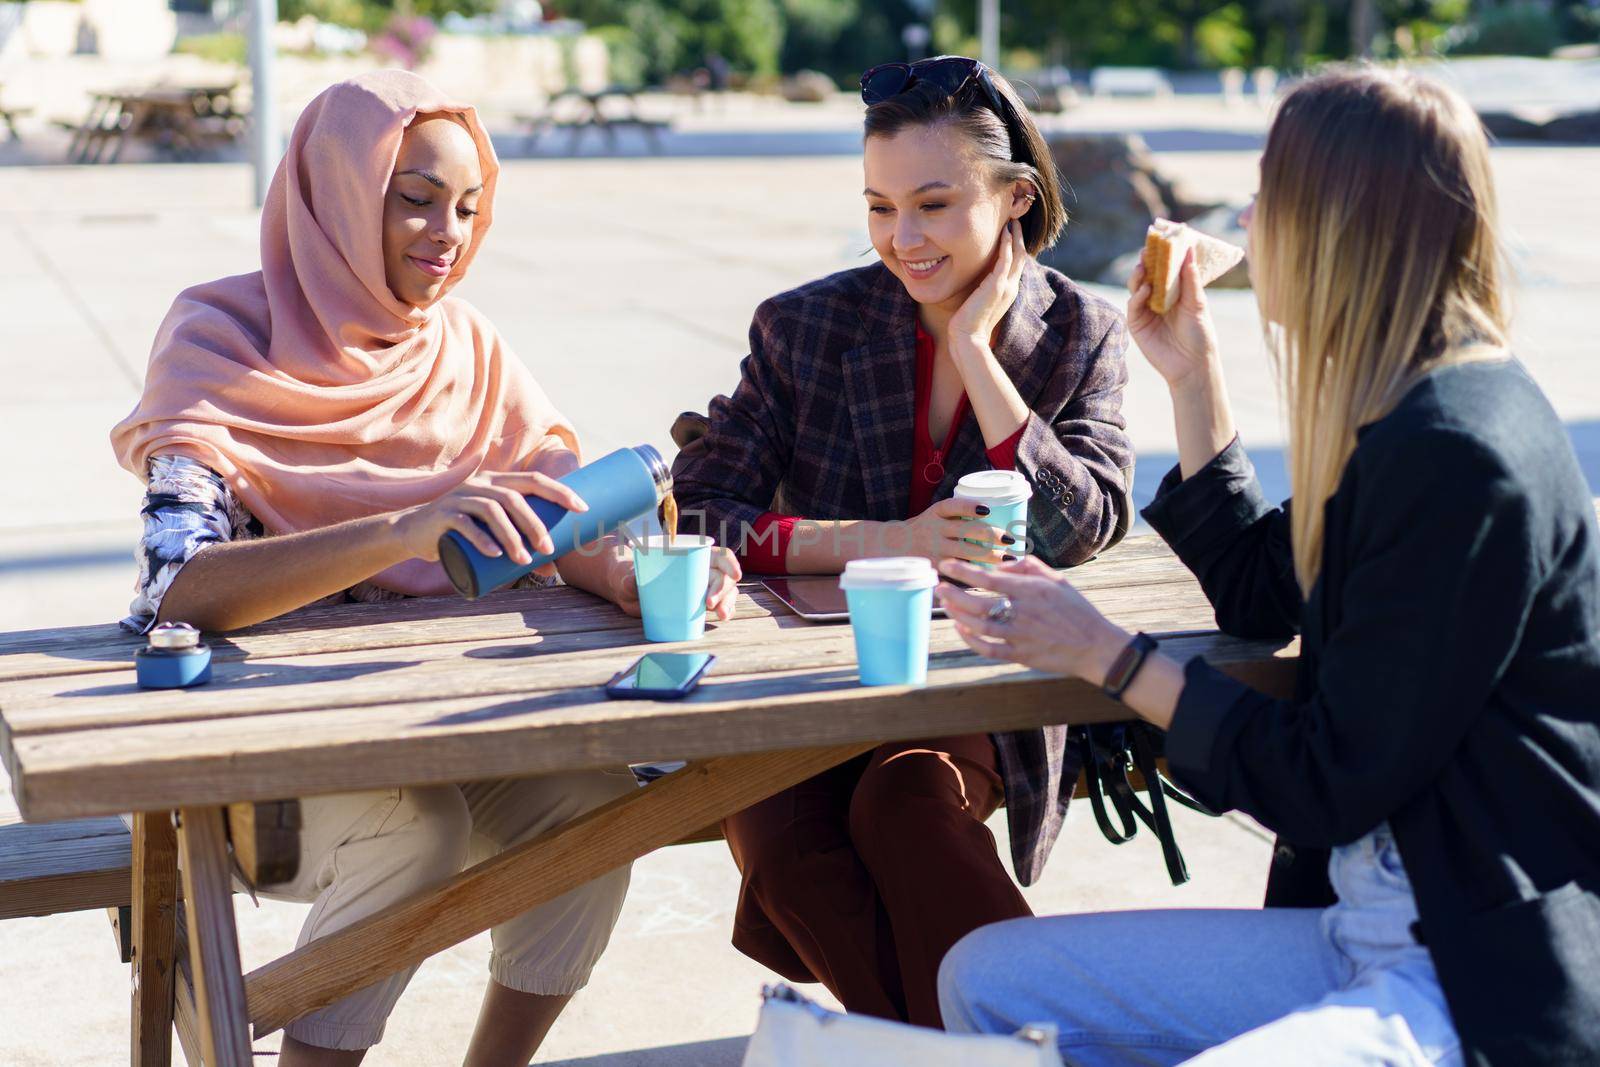 Happy young Muslim woman in hijab, pouring coffee from thermos into disposable cup, while having break with female friends in casual clothes sitting at wooden table in city park.